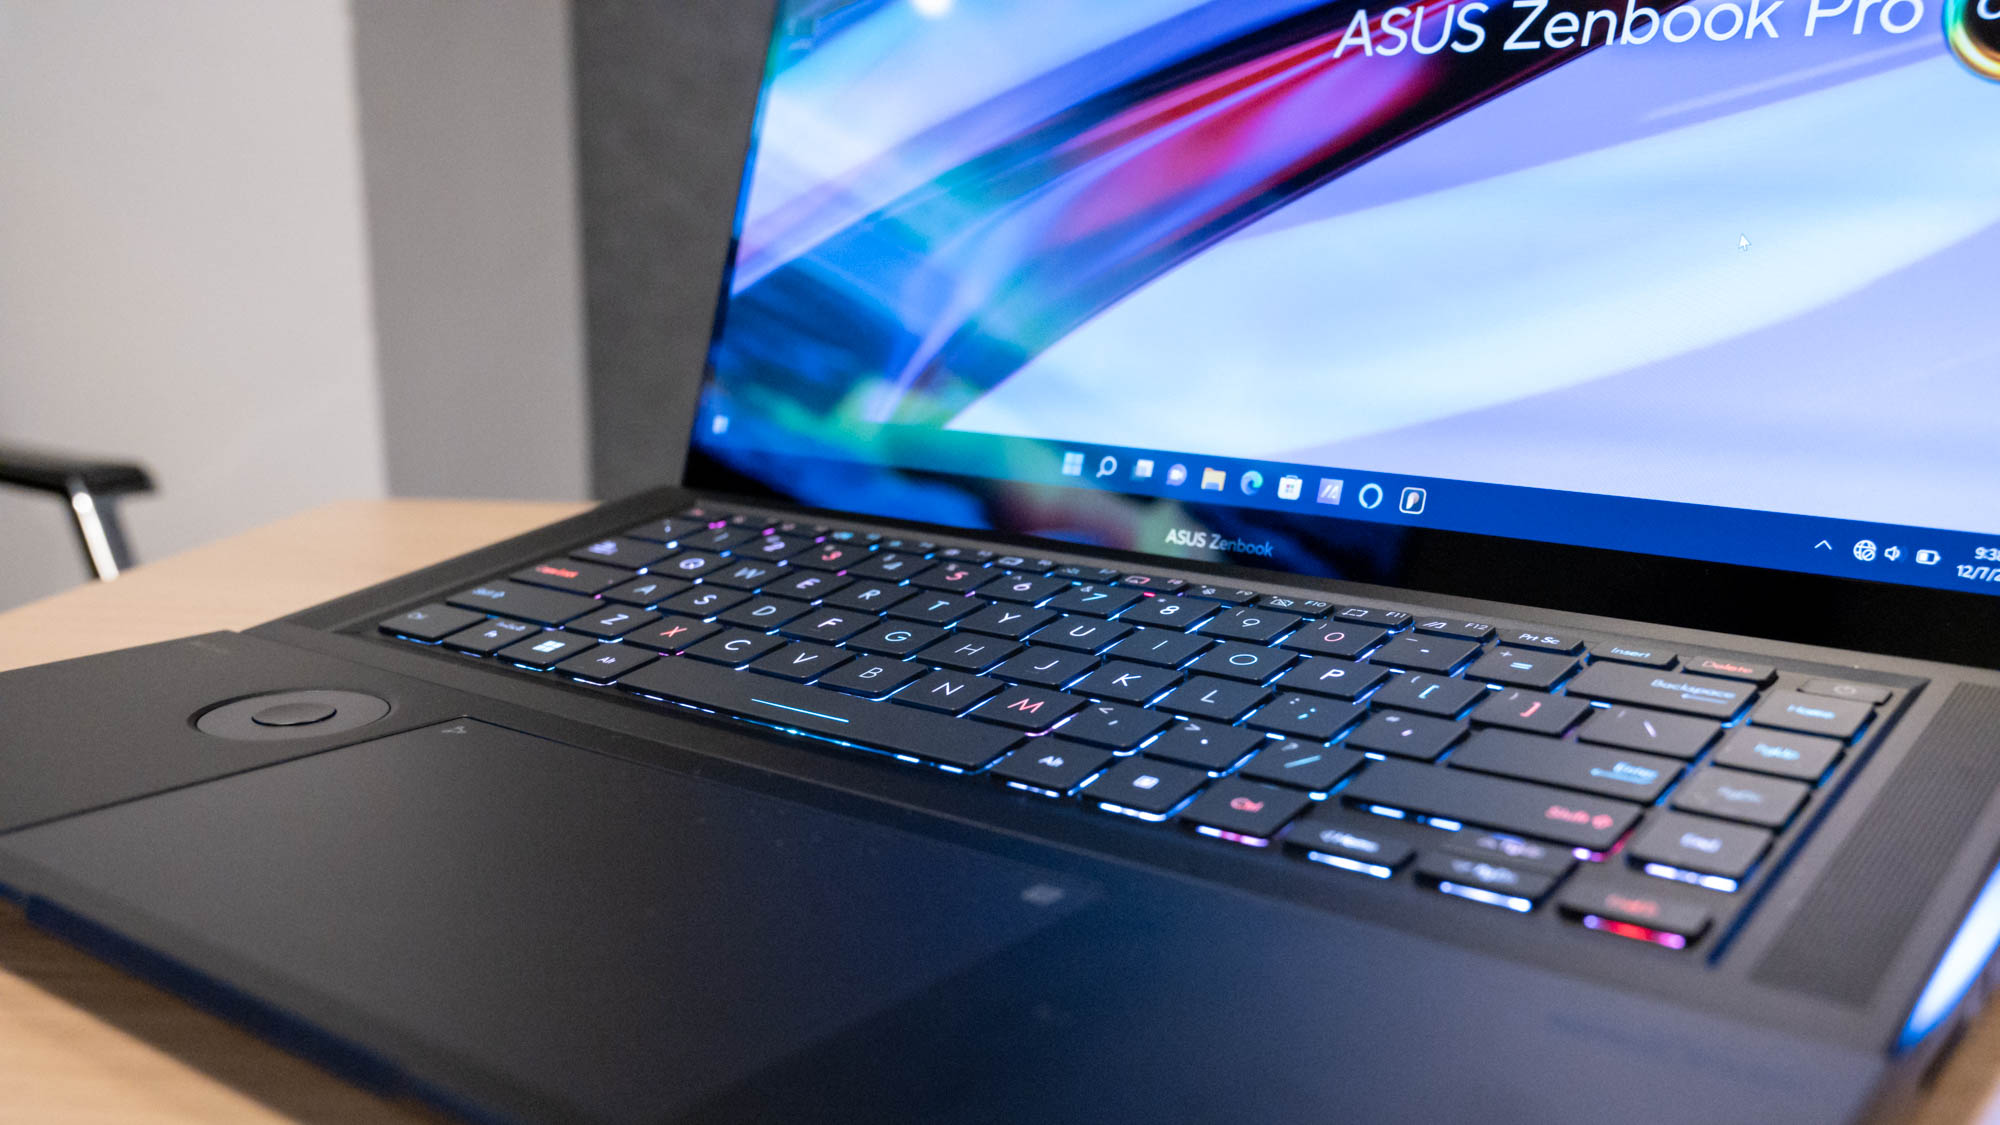 Asus Zenbook Pro 16X OLED with screen close-up